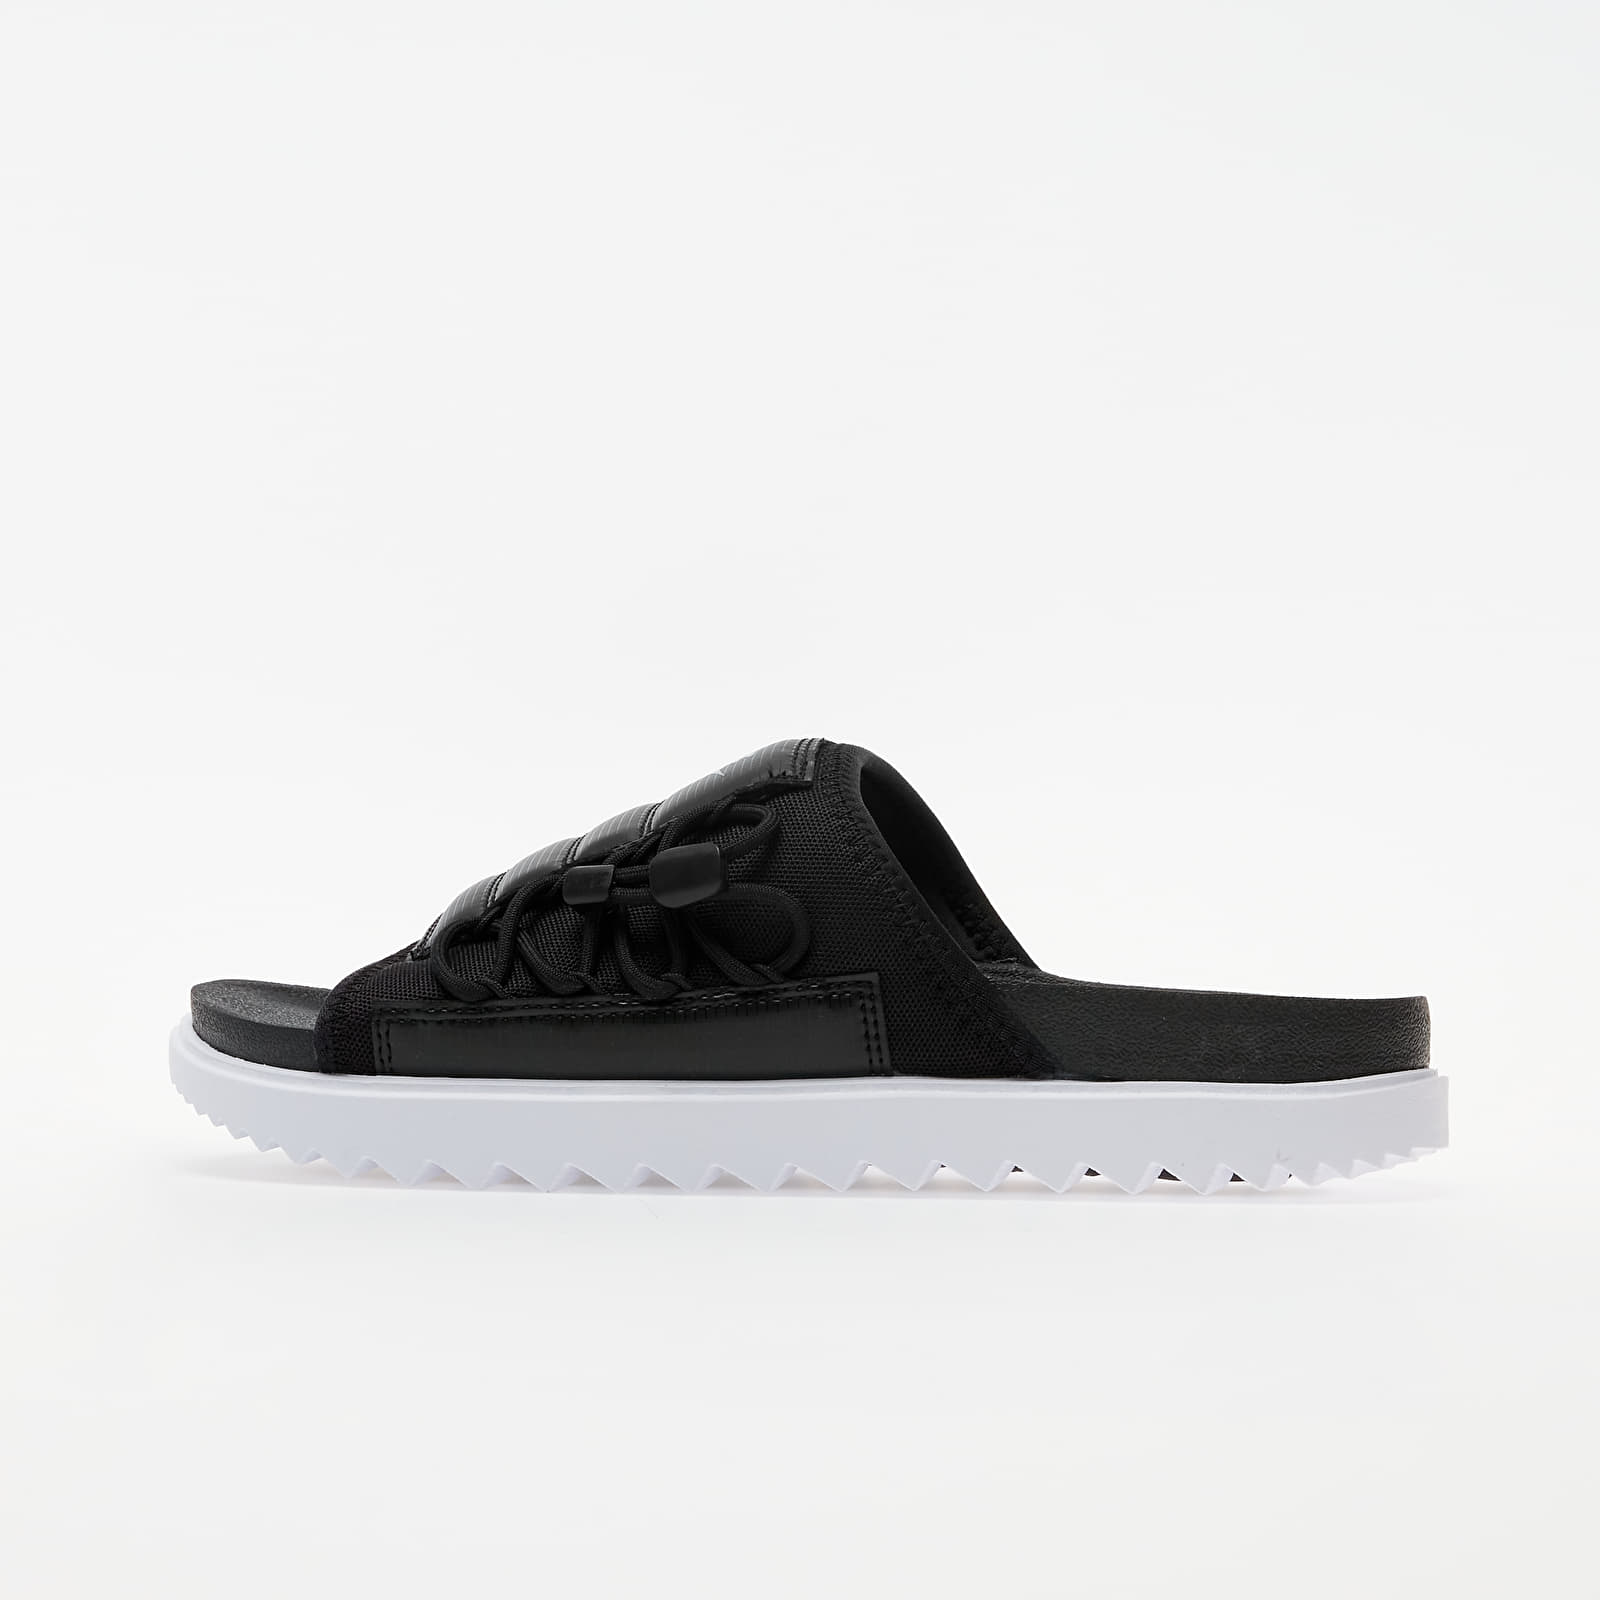 Chaussures et baskets homme Nike Asuna Slide Black/ Anthracite-White